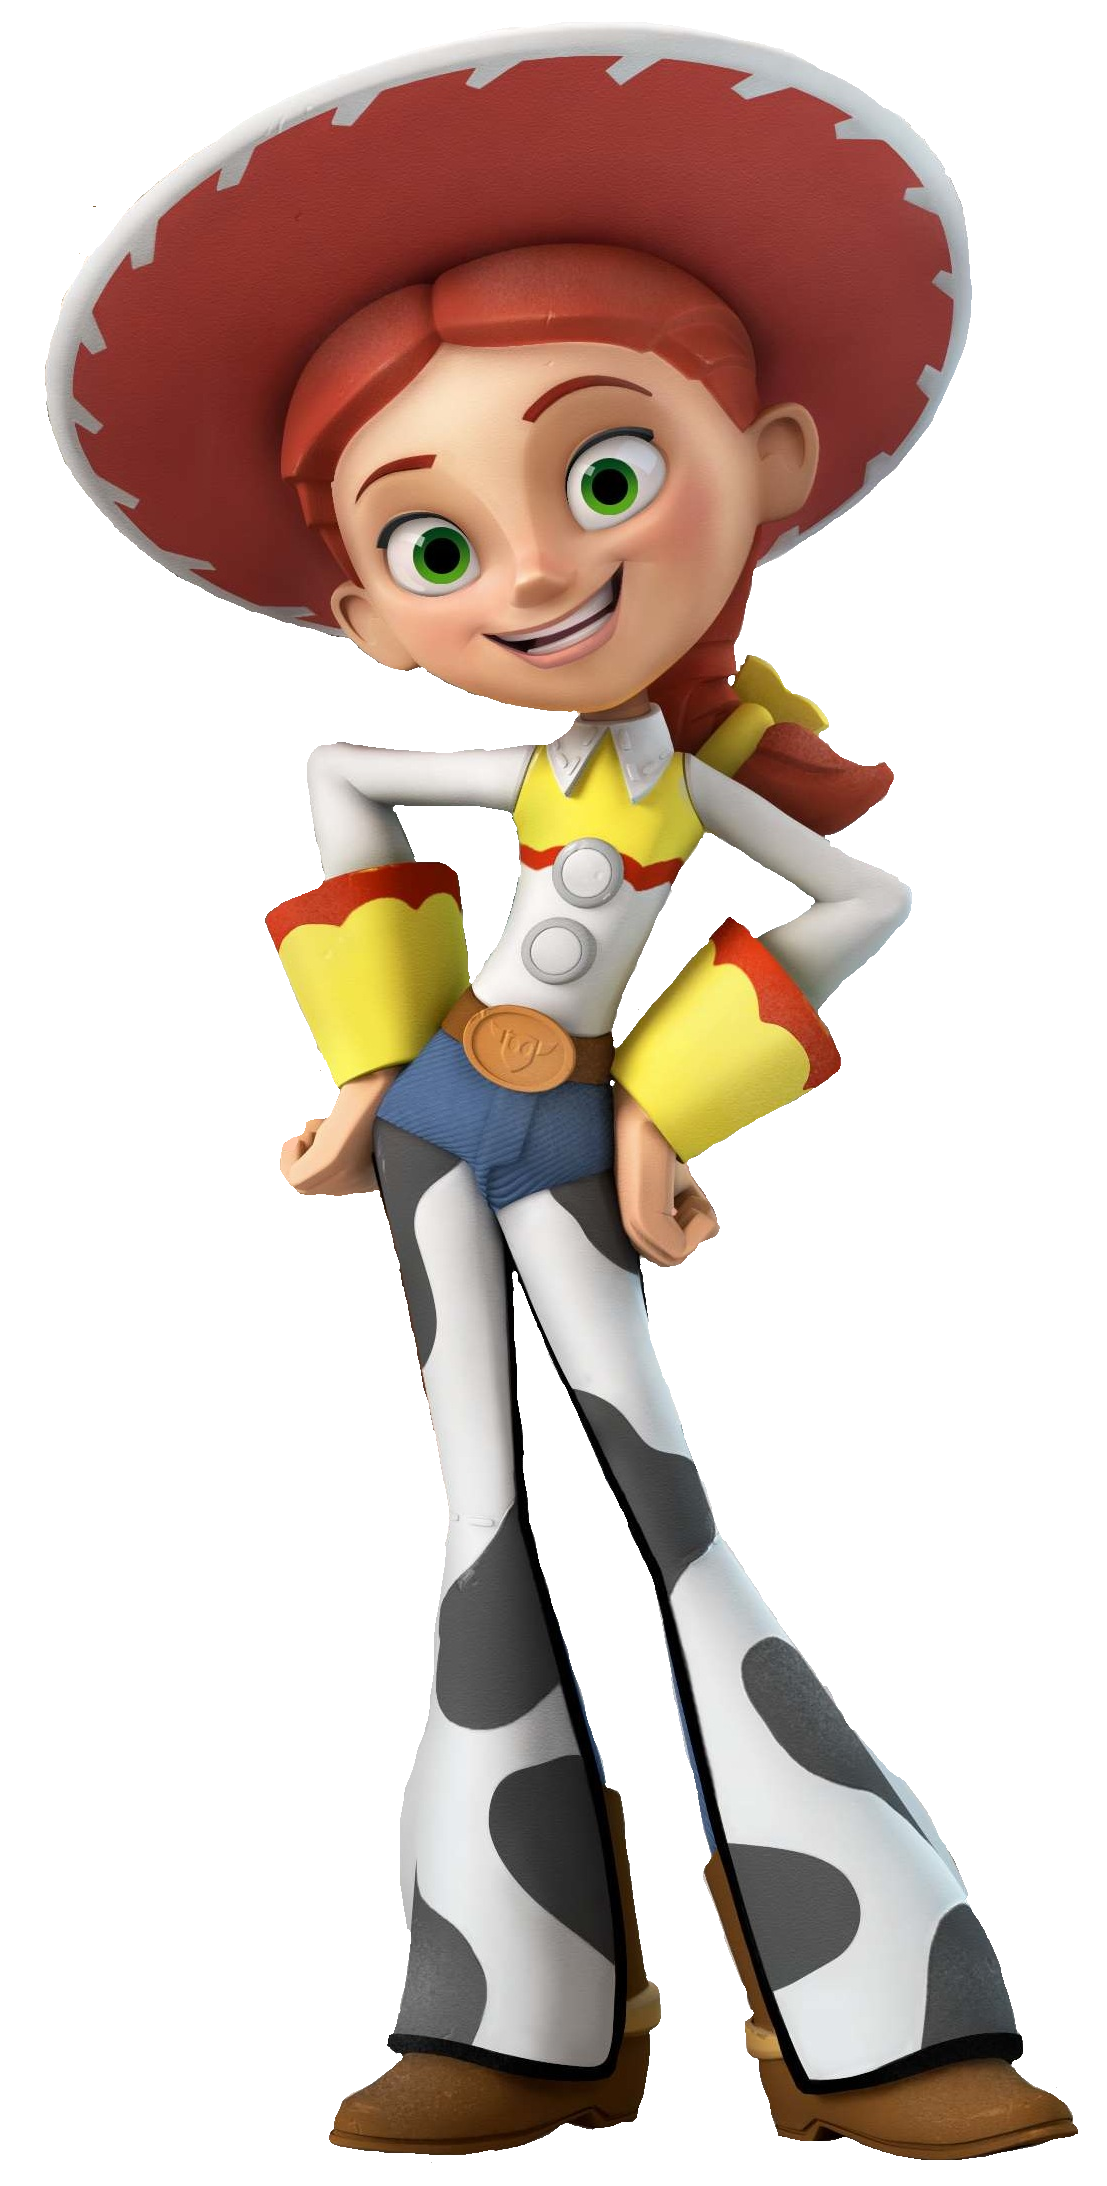 Toy Story Jessie File PNG Image